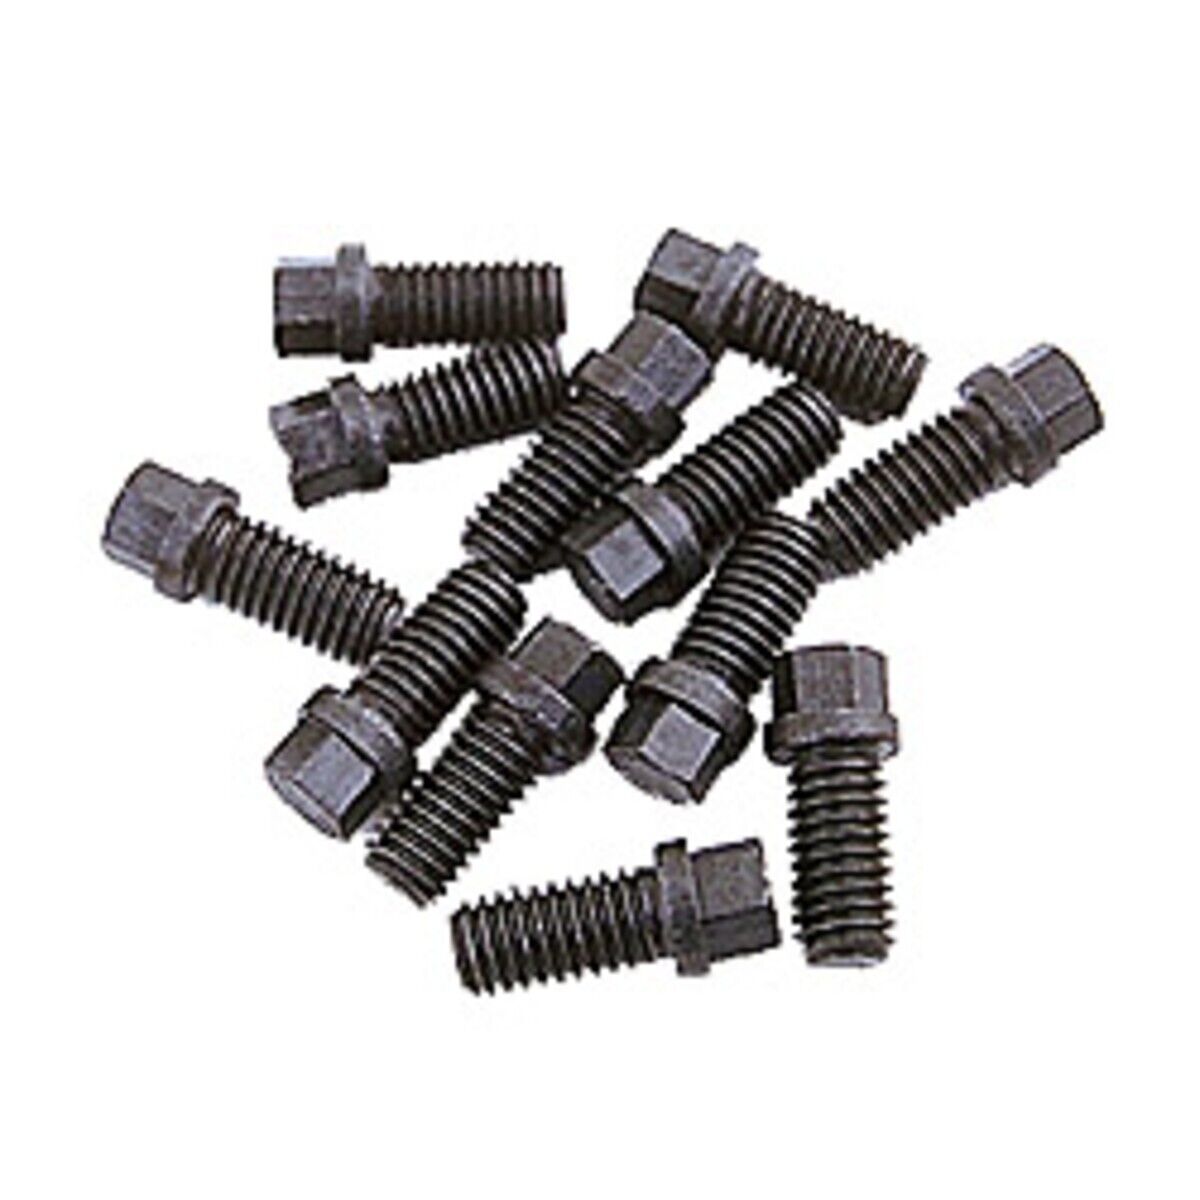 8885 Transdapt Set of 12 Header Bolts for Chevy Suburban Town and Country SaVana